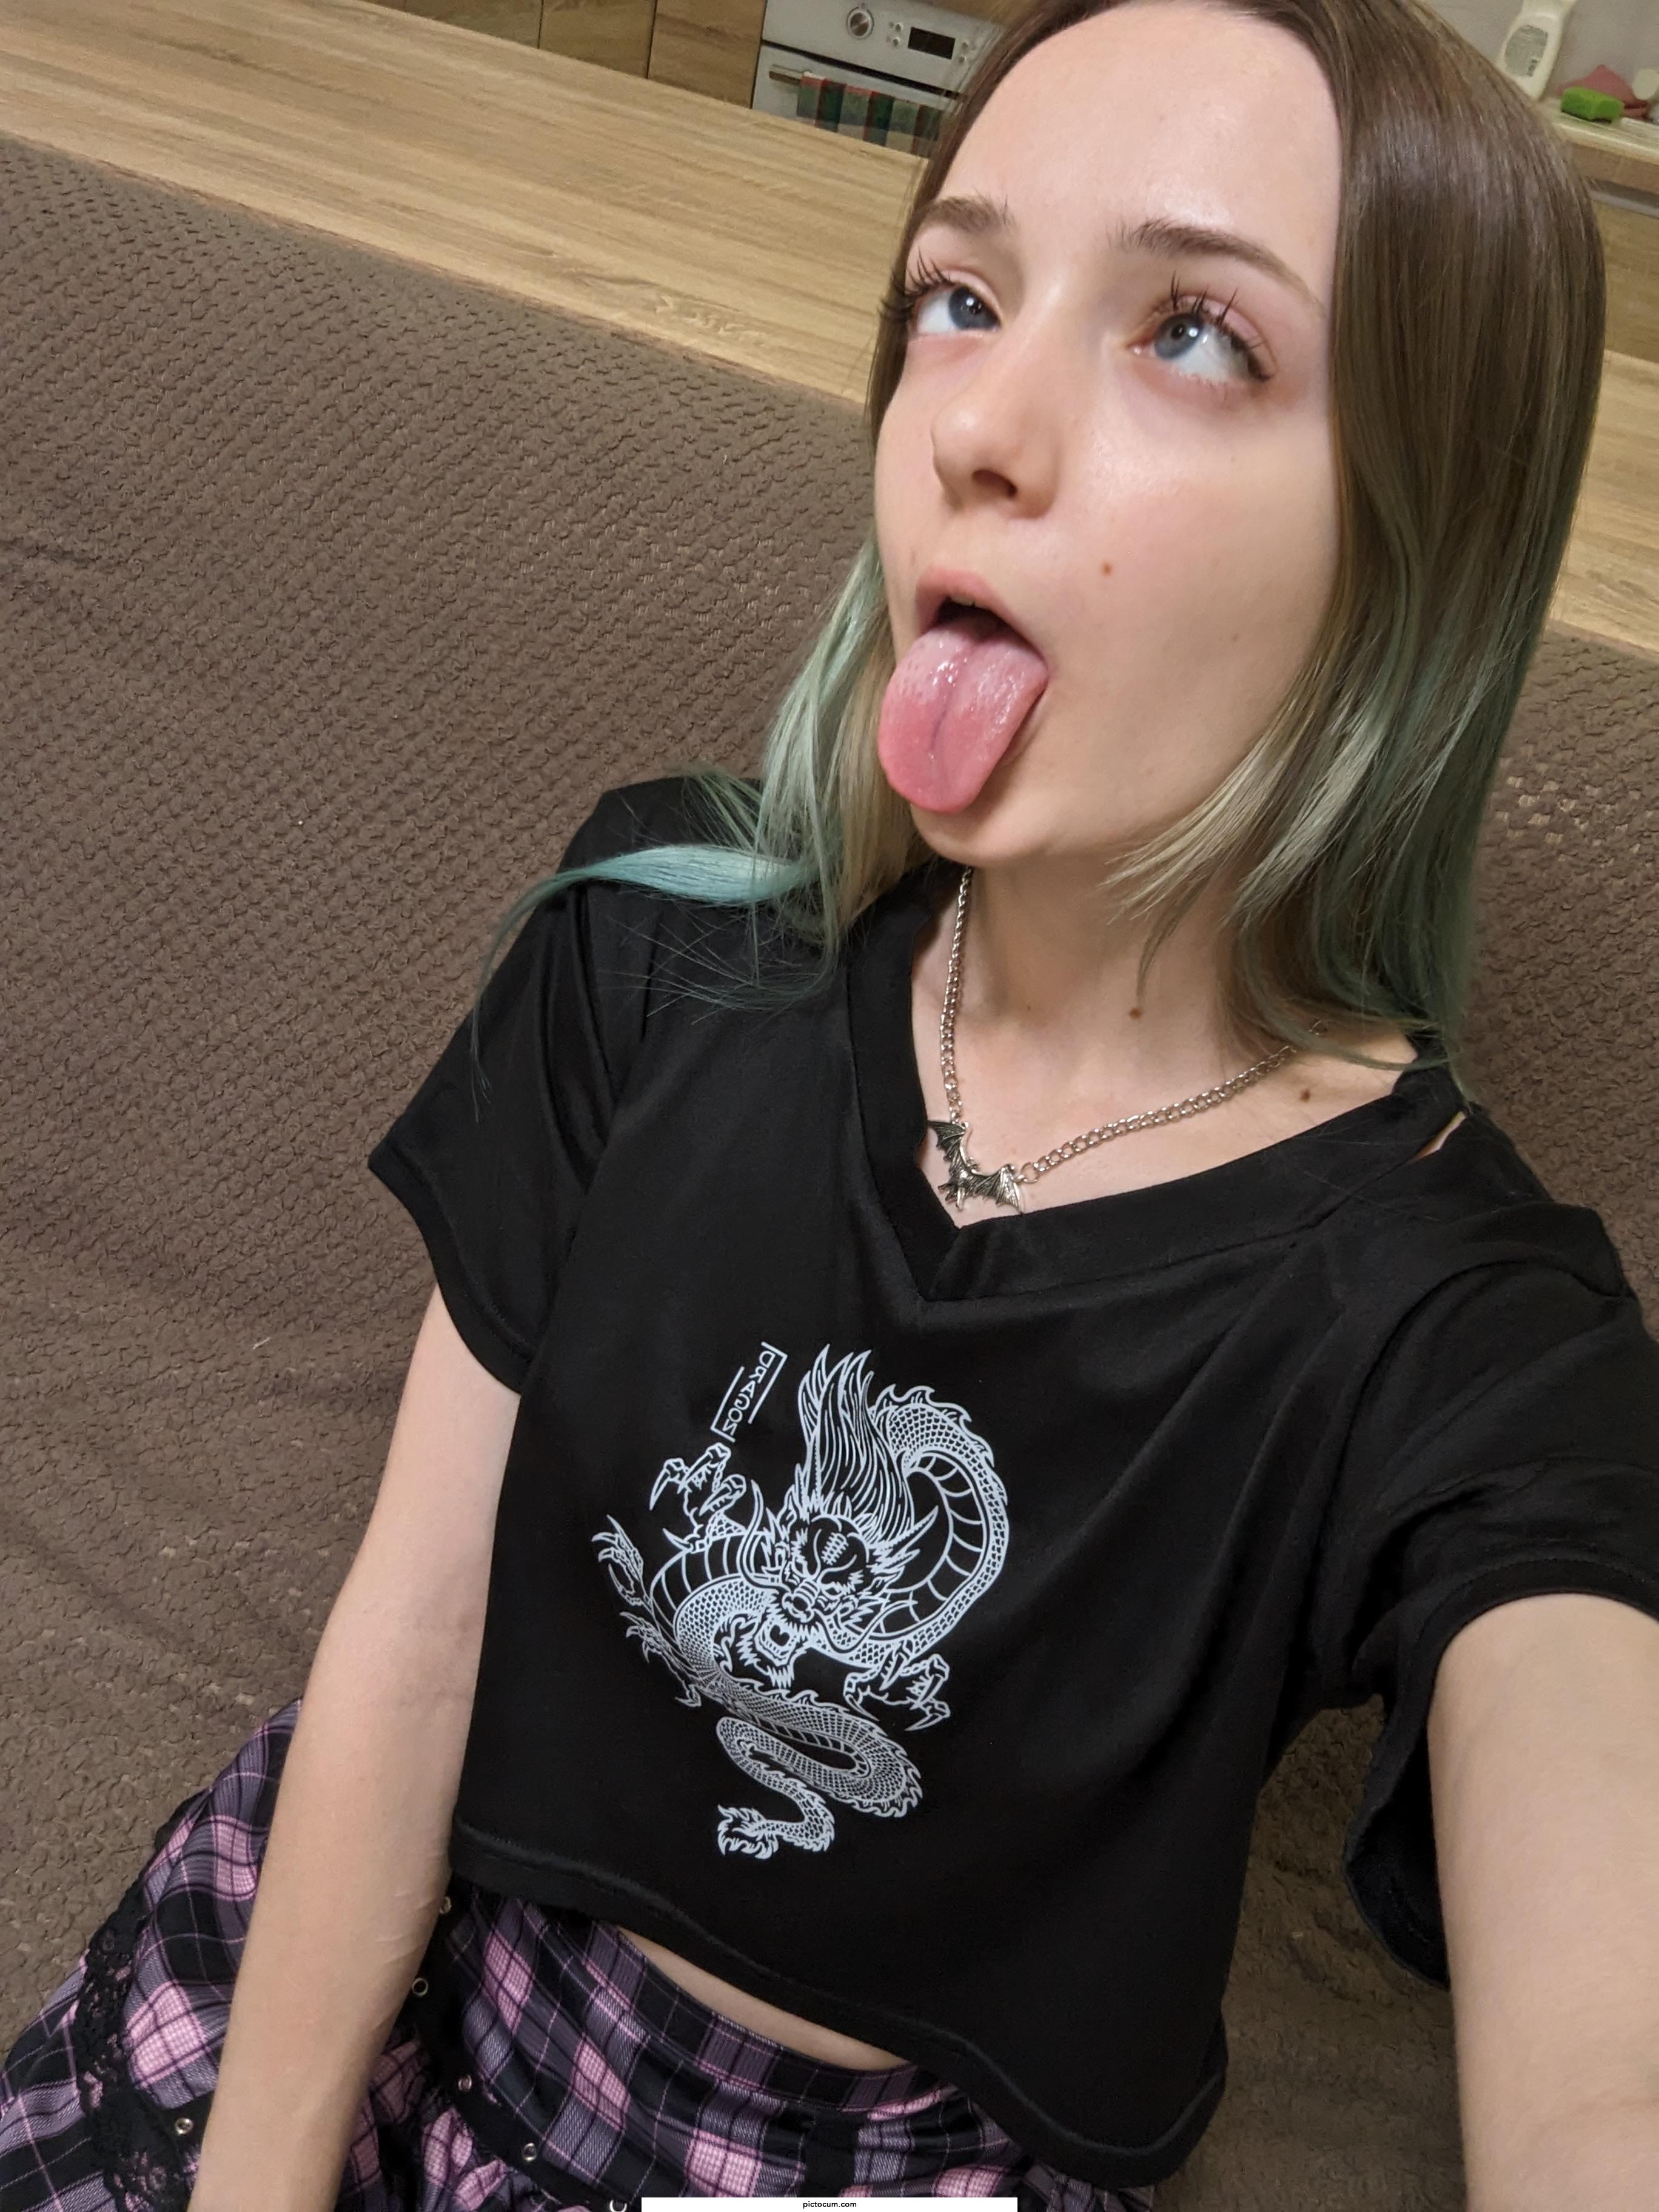 my ahegao is the cutest thing you've ever seen, isn't it